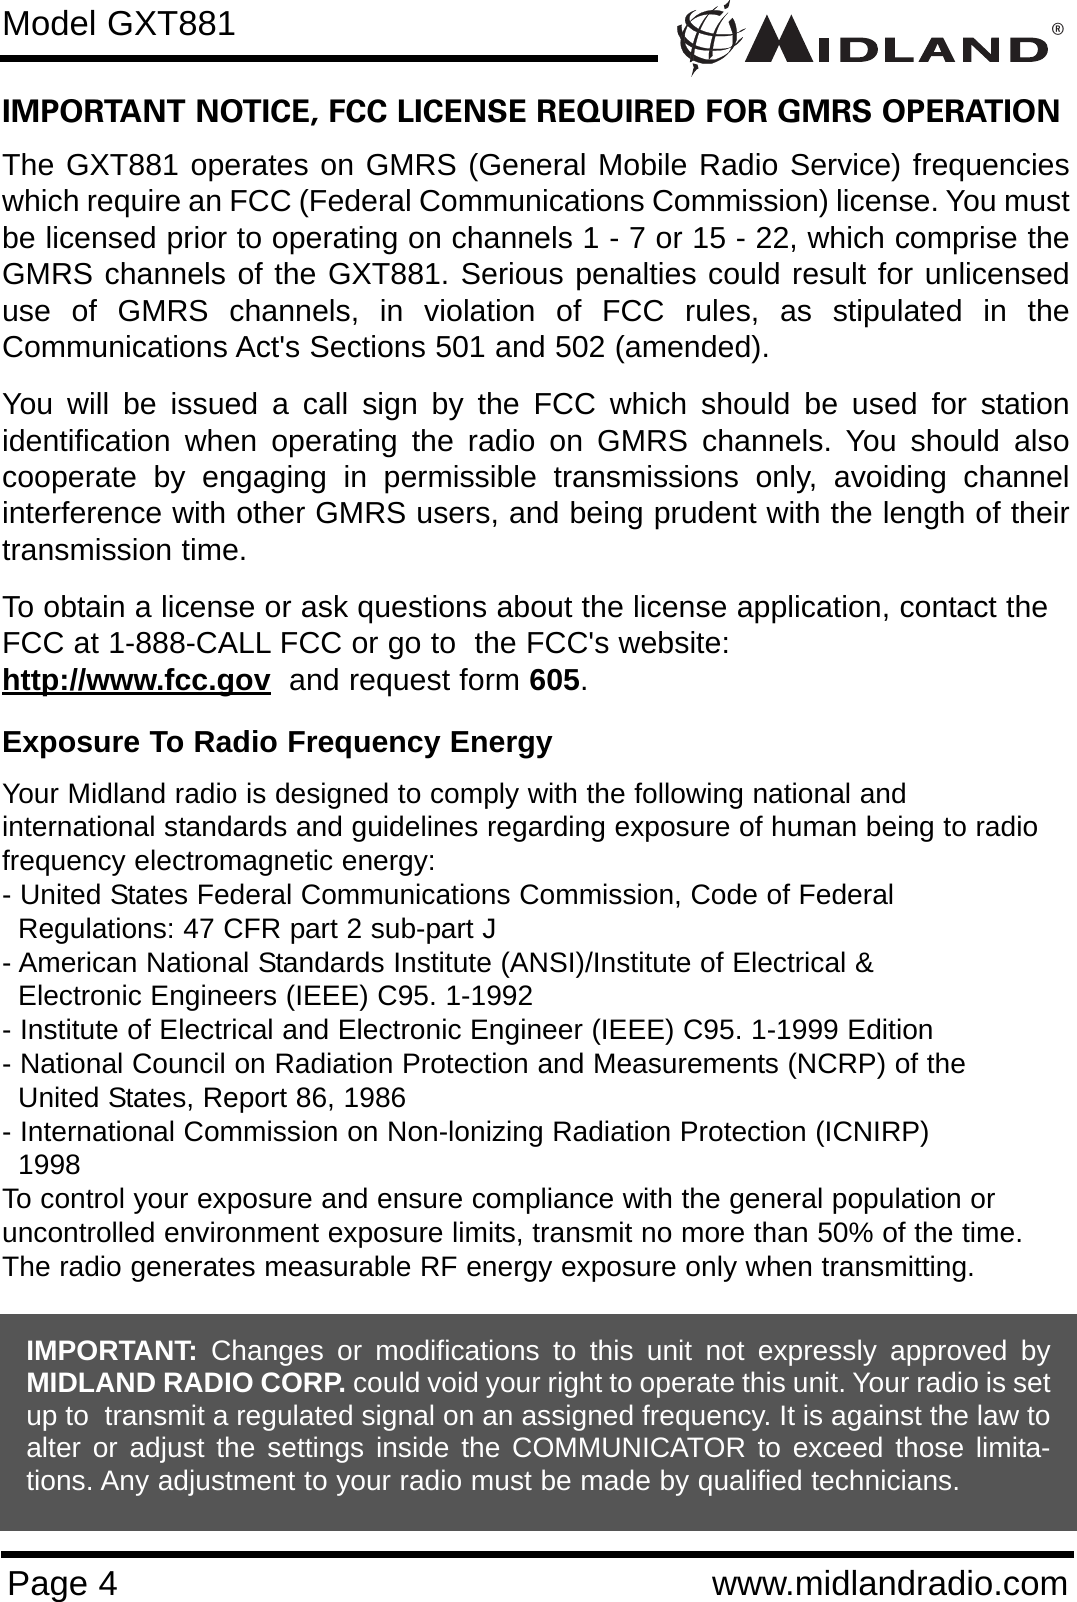 ®Page 4 www.midlandradio.comIMPORTANT NOTICE, FCC LICENSE REQUIRED FOR GMRS OPERATIONThe GXT881 operates on GMRS (General Mobile Radio Service) frequencieswhich require an FCC (Federal Communications Commission) license. You mustbe licensed prior to operating on channels 1 - 7 or 15 - 22, which comprise theGMRS channels of the GXT881. Serious penalties could result for unlicenseduse of GMRS channels, in violation of FCC rules, as stipulated in theCommunications Act&apos;s Sections 501 and 502 (amended).You will be issued a call sign by the FCC which should be used for stationidentification when operating the radio on GMRS channels. You should alsocooperate by engaging in permissible transmissions only, avoiding channelinterference with other GMRS users, and being prudent with the length of theirtransmission time.To obtain a license or ask questions about the license application, contact theFCC at 1-888-CALL FCC or go to  the FCC&apos;s website:  http://www.fcc.gov and request form 605.Exposure To Radio Frequency EnergyYour Midland radio is designed to comply with the following national and international standards and guidelines regarding exposure of human being to radiofrequency electromagnetic energy:- United States Federal Communications Commission, Code of Federal Regulations: 47 CFR part 2 sub-part J- American National Standards Institute (ANSI)/Institute of Electrical &amp; Electronic Engineers (IEEE) C95. 1-1992- Institute of Electrical and Electronic Engineer (IEEE) C95. 1-1999 Edition- National Council on Radiation Protection and Measurements (NCRP) of the United States, Report 86, 1986- International Commission on Non-lonizing Radiation Protection (ICNIRP) 1998To control your exposure and ensure compliance with the general population oruncontrolled environment exposure limits, transmit no more than 50% of the time.The radio generates measurable RF energy exposure only when transmitting.Model GXT881IMPORTANT: Changes or modifications to this unit not expressly approved byMIDLAND RADIO CORP. could void your right to operate this unit. Your radio is setup to  transmit a regulated signal on an assigned frequency. It is against the law toalter or adjust the settings inside the COMMUNICATOR to exceed those limita-tions. Any adjustment to your radio must be made by qualified technicians.